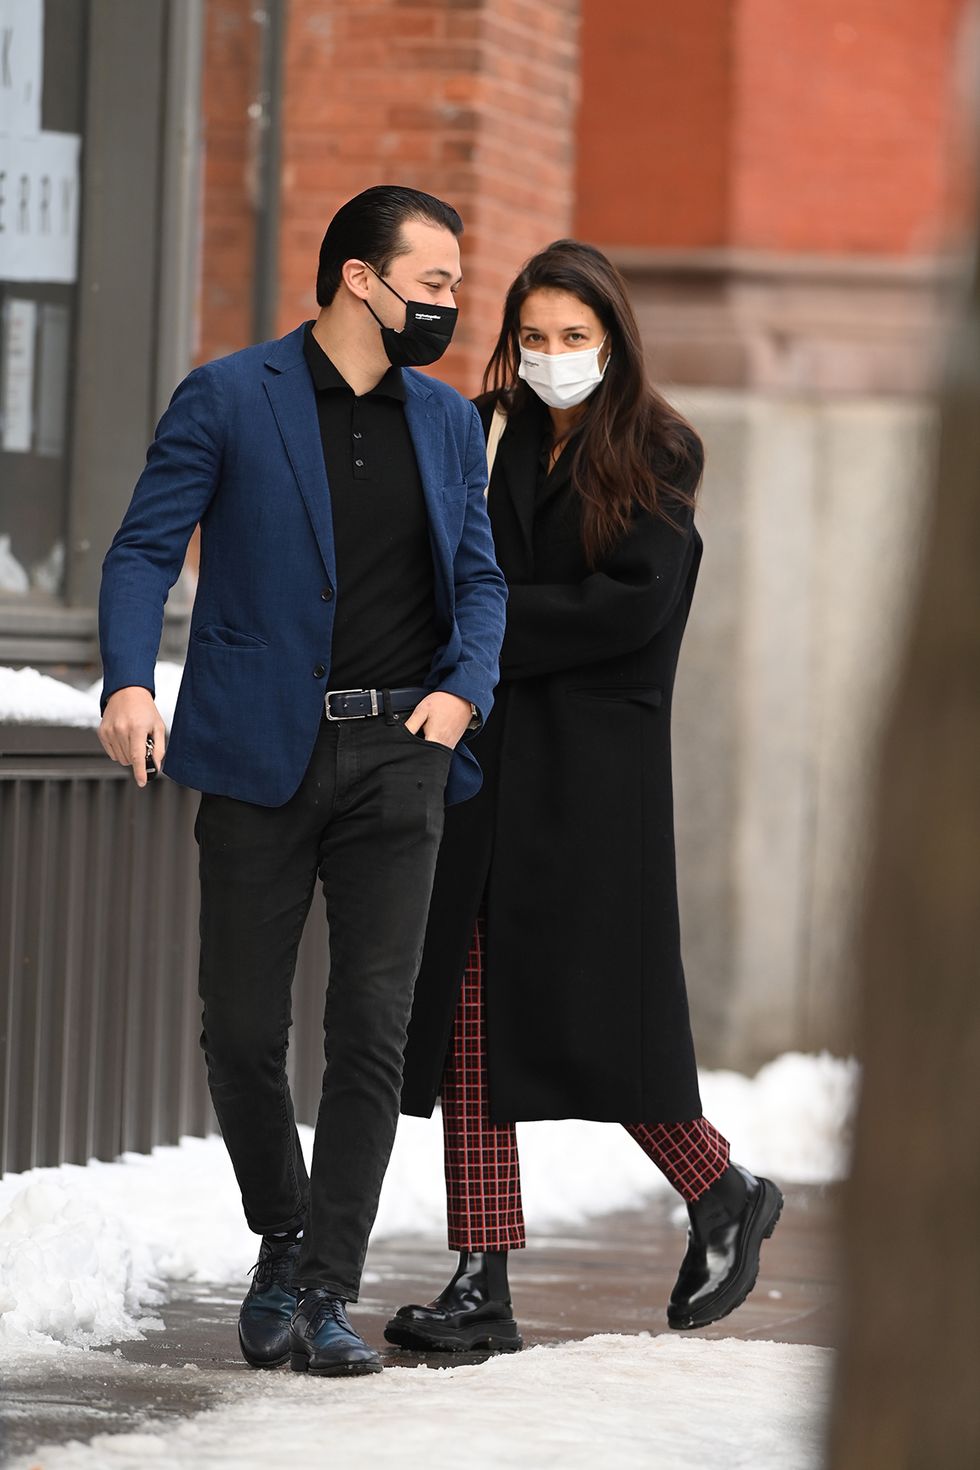 exclusive katie holmes spotted out for a walk on her 42nd birthday with her boyfriend emilio vitolo a day after a heavy snow storm in new york city earlier today, the couple declared their love for each other on instagrampictured emilio vitolo jr,katie holmesref spl5203658 181220 exclusivepicture by elder ordonez  splashnewscomsplash news and picturesusa 1 310 525 5808london 44 020 8126 1009berlin 49 175 3764 166photodesksplashnewscomworld rights, no poland rights, no portugal rights, no russia rights